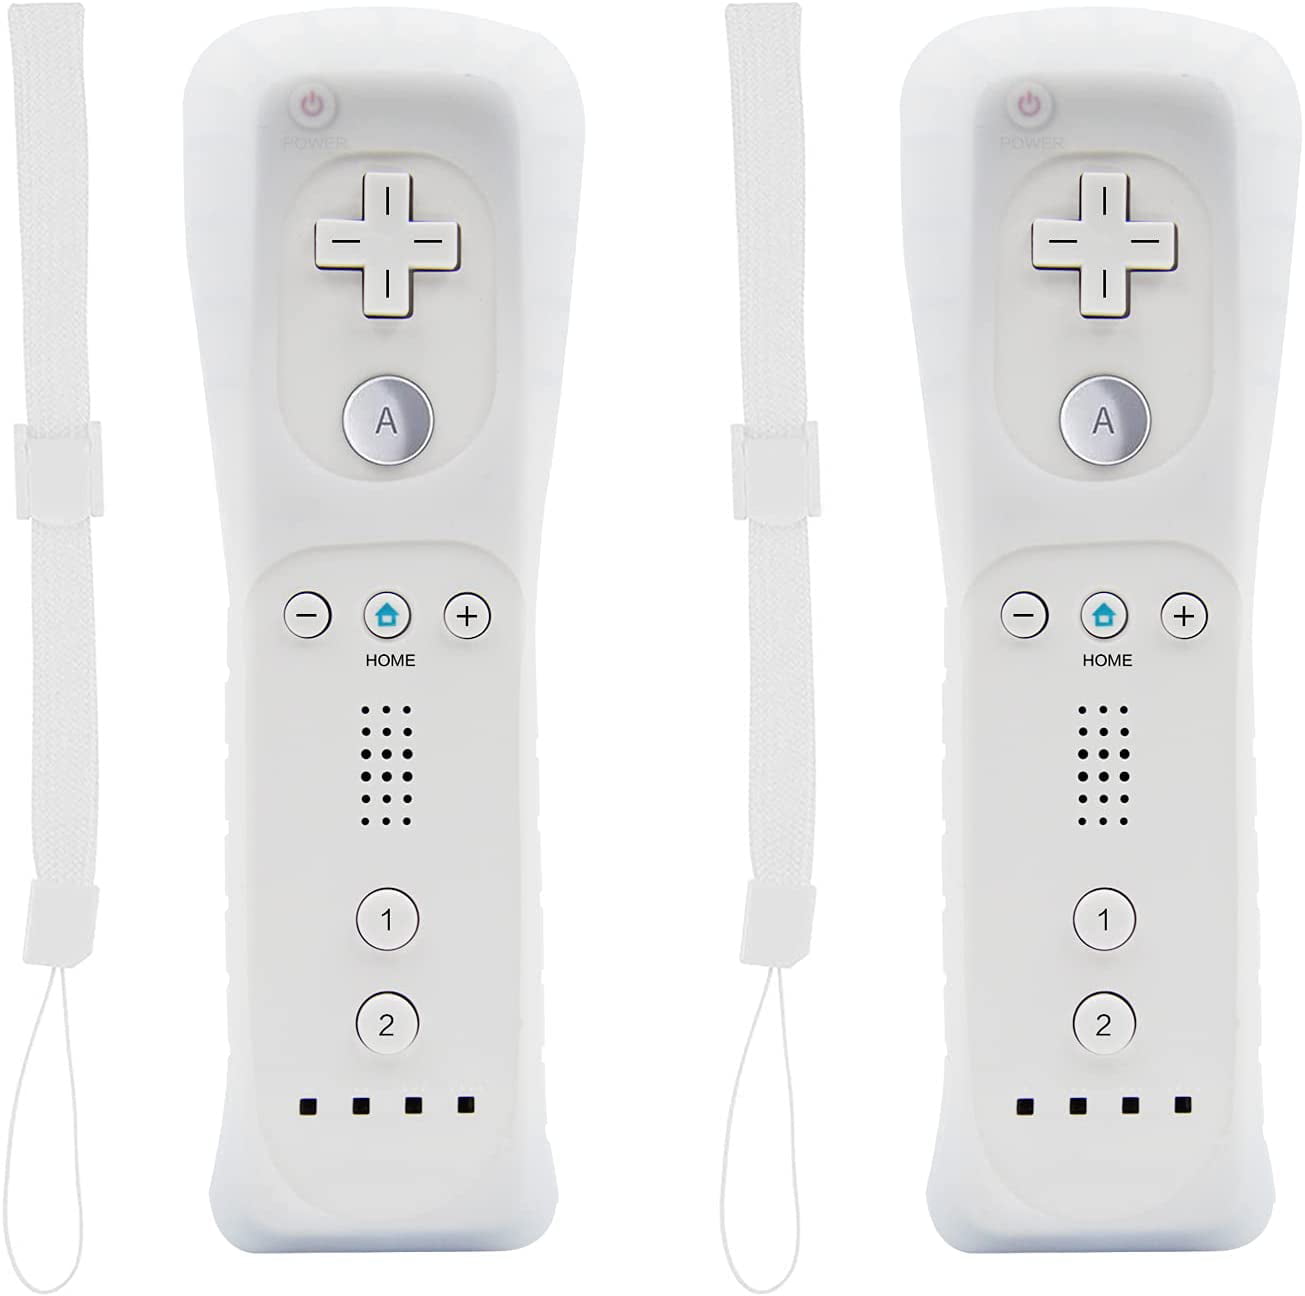 baai Formuleren verraad Wii Remote Controller for Nintendo Wii and Wii U Console,2 Pack Wireless  Remote Game Controller with Silicone Case and Wrist Strap - Walmart.com